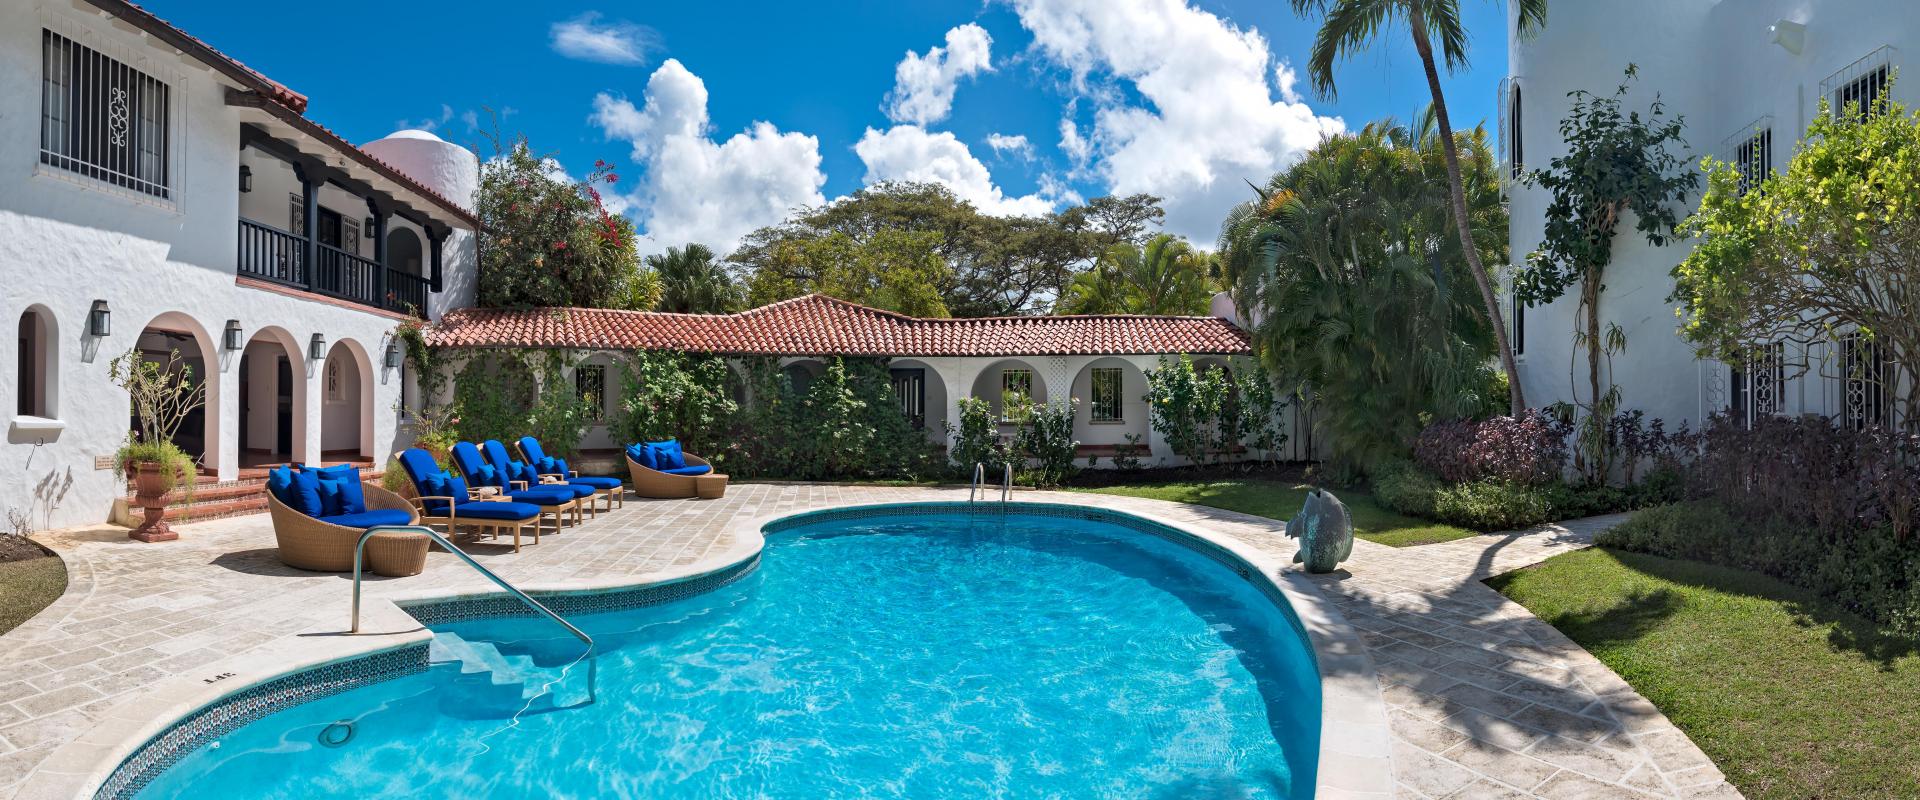 Sandy Lane, Elsewhere House/Villa For Rent in Barbados